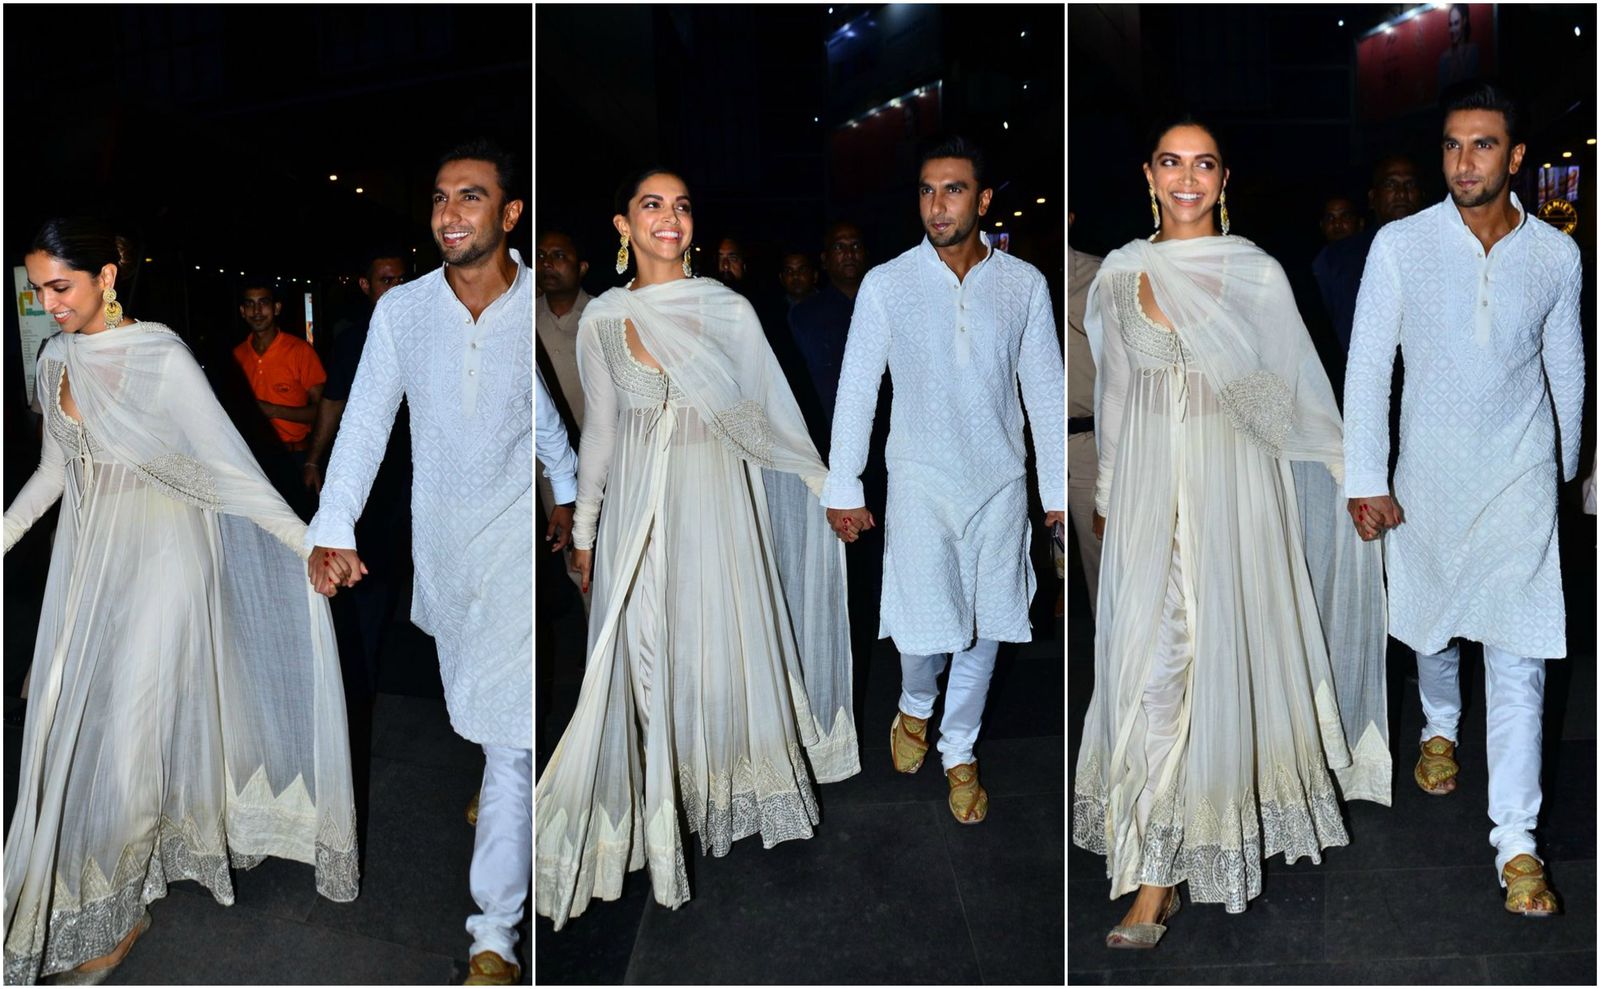 Deepika Padukone And Ranveer Singh Make Their Relationship Official As They're Spotted Hand-In-Hand At Padmaavat's Screening!